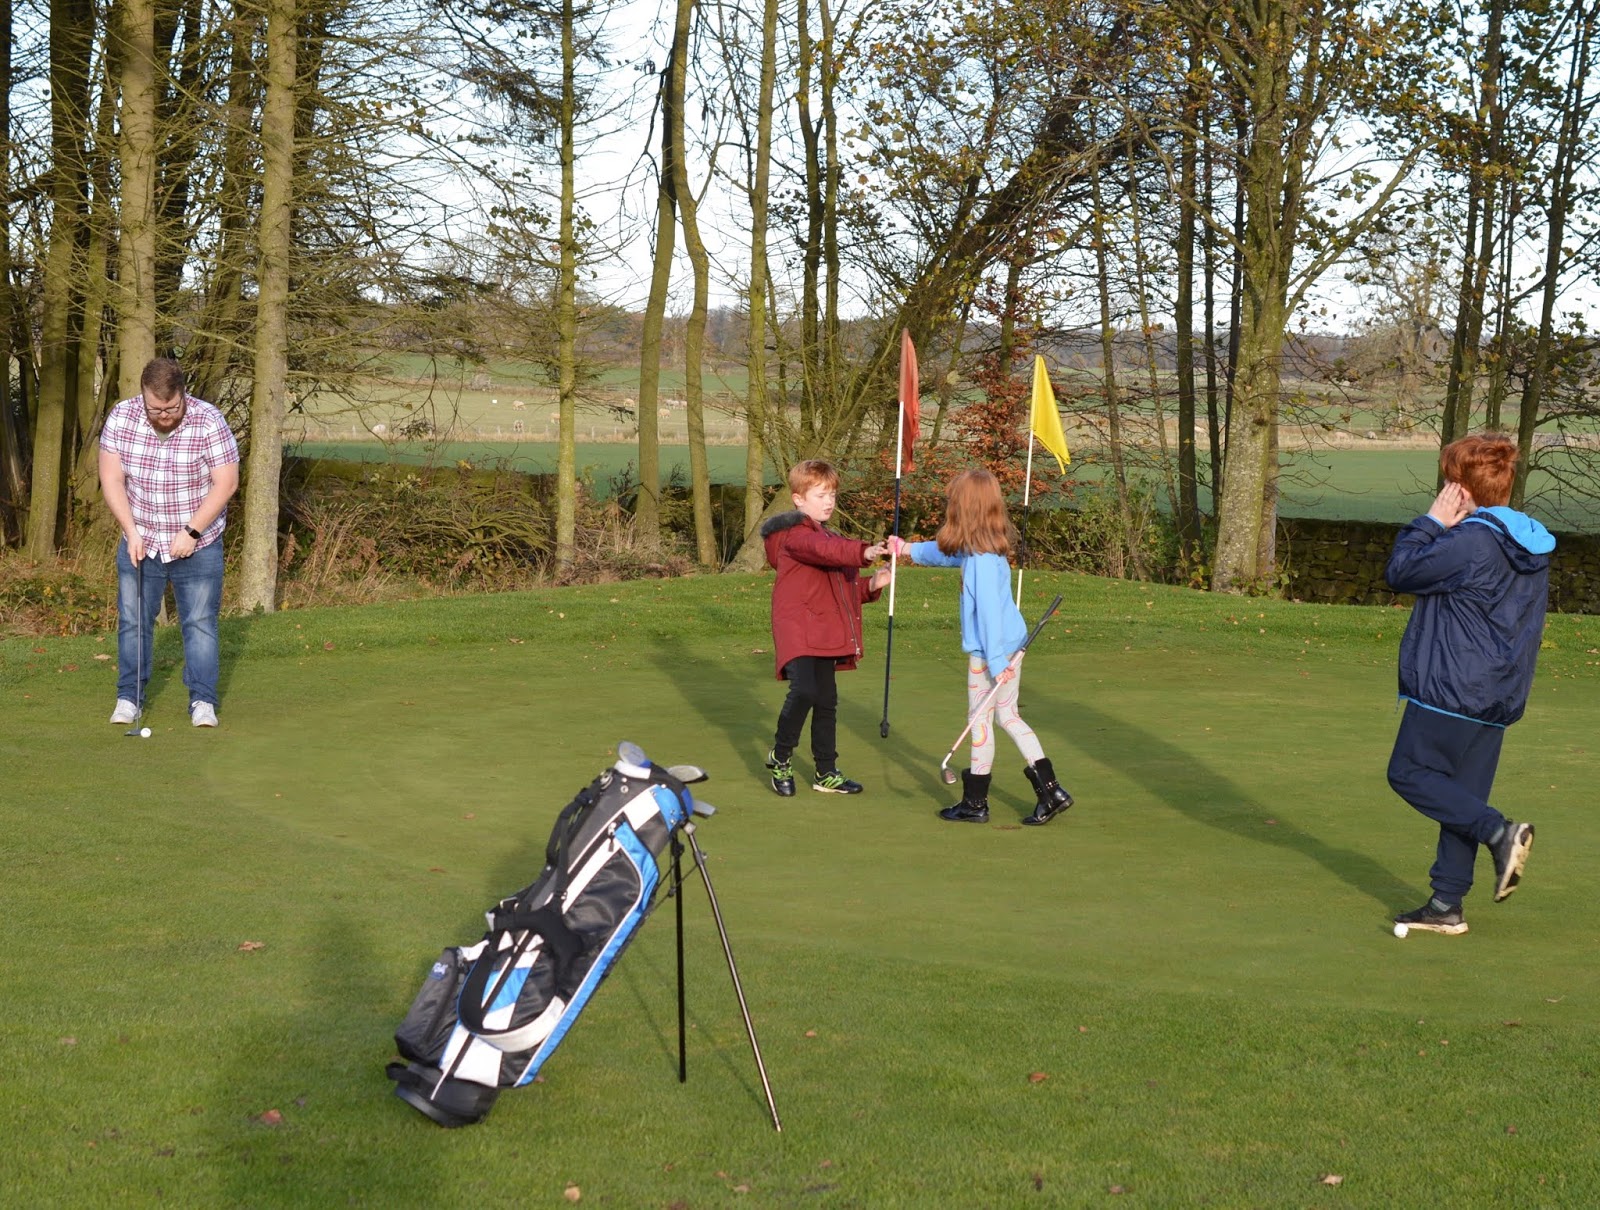 10 Reasons to Stay at Matfen Hall in Northumberland with Kids  - Par 3 Golf Course with kids 